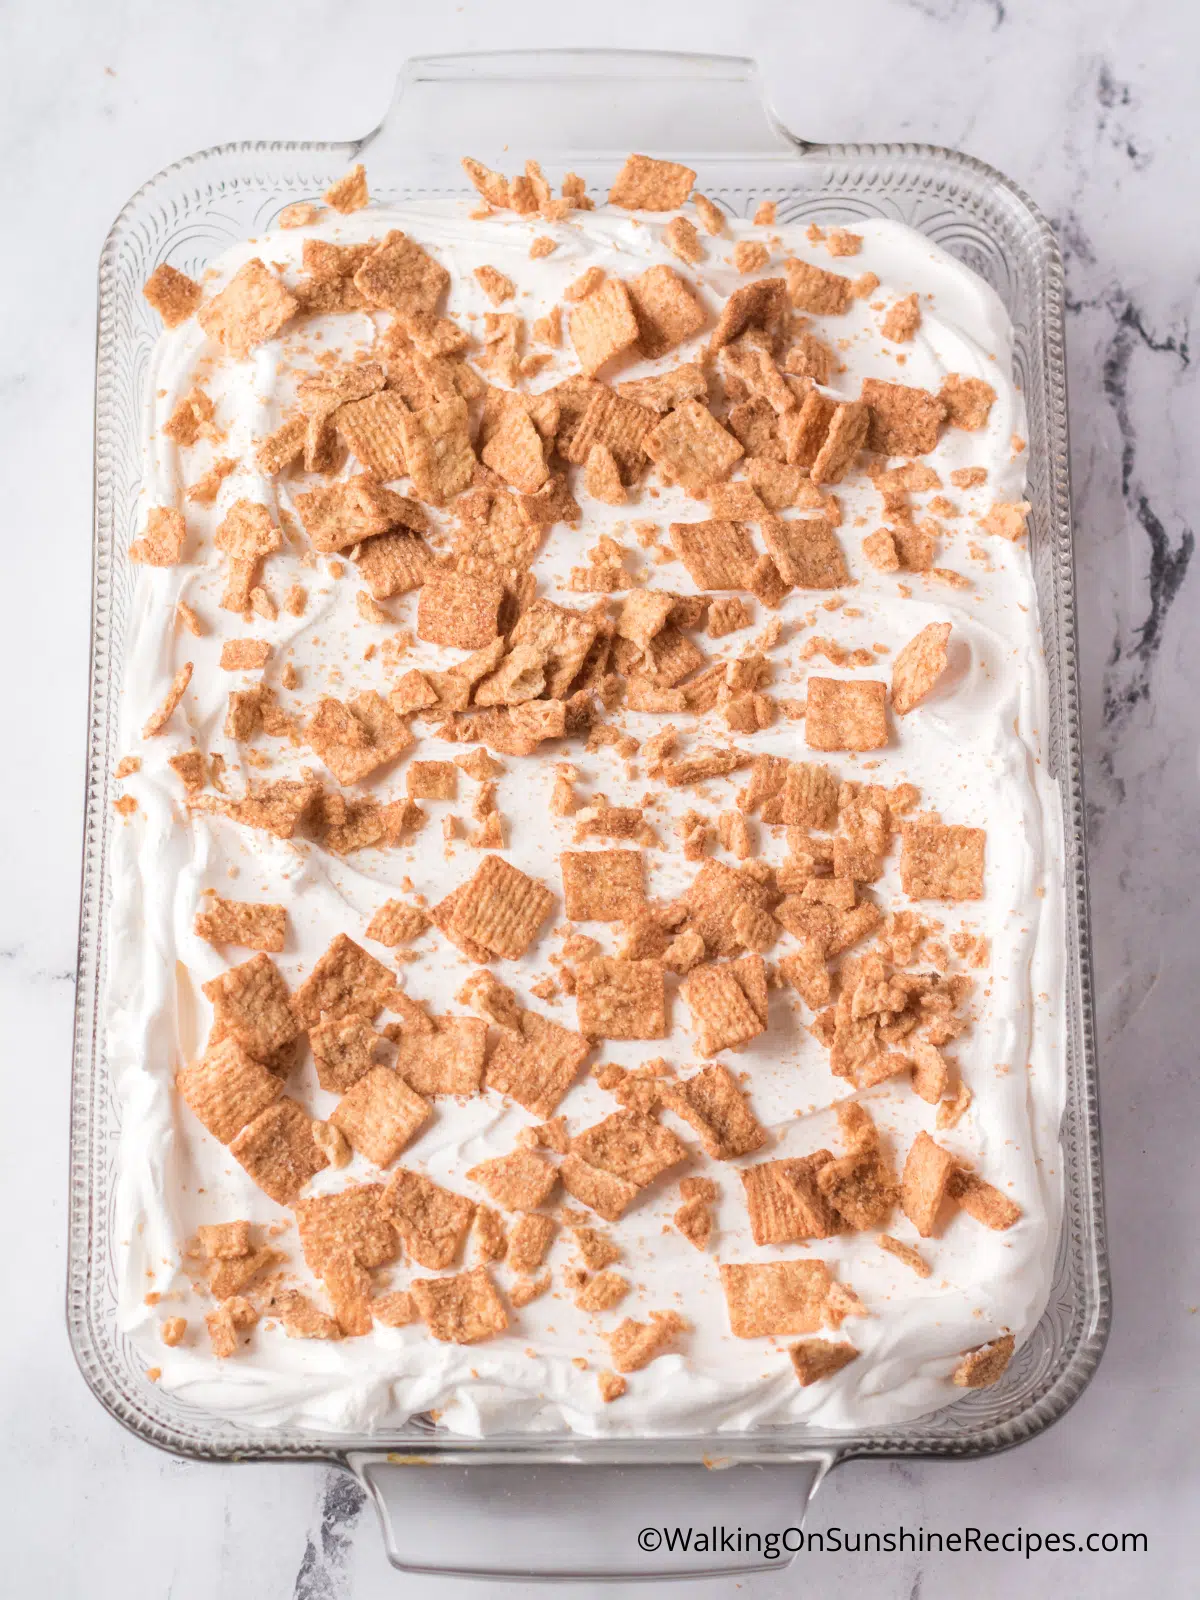 Cover with whipped topping and crushed cereal.